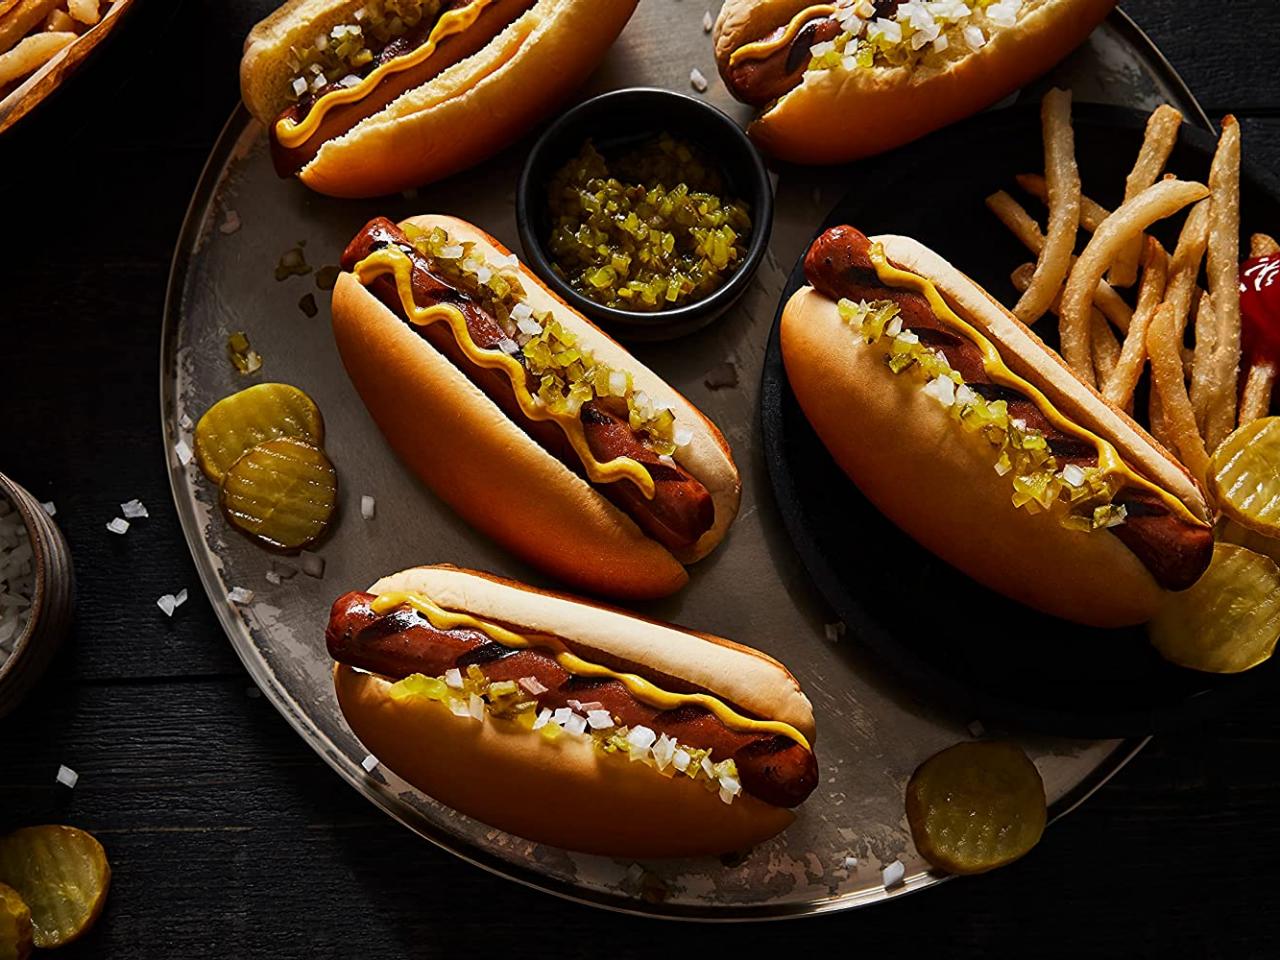 The Best Turkey and Chicken Hot Dogs You Can Buy at the Store or Online